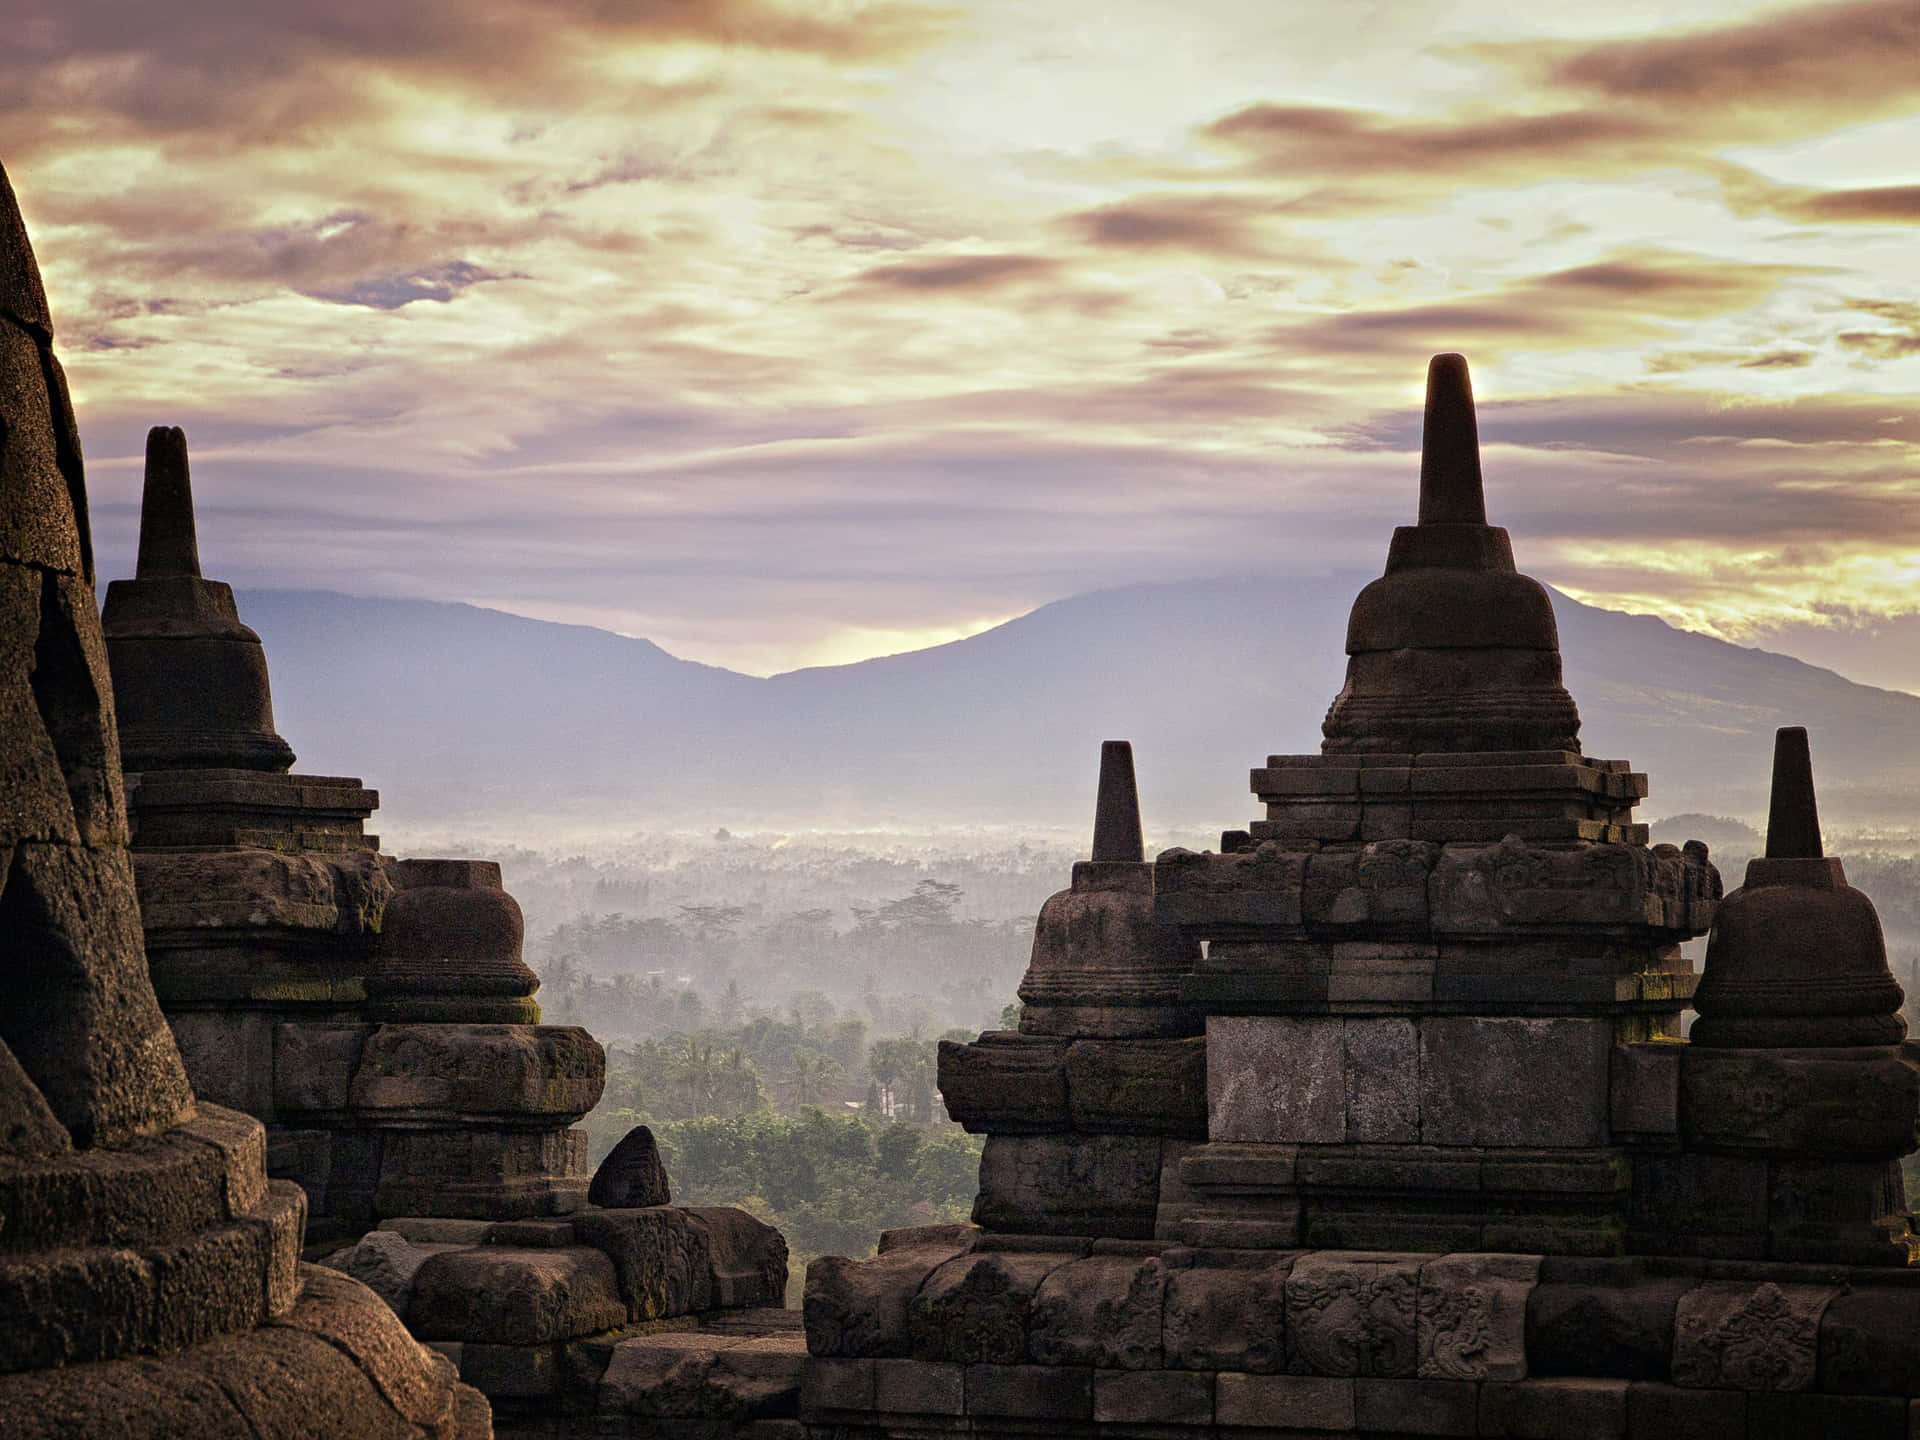 Breathtaking view of Borobudur Temple under a bright yellow sky. Wallpaper